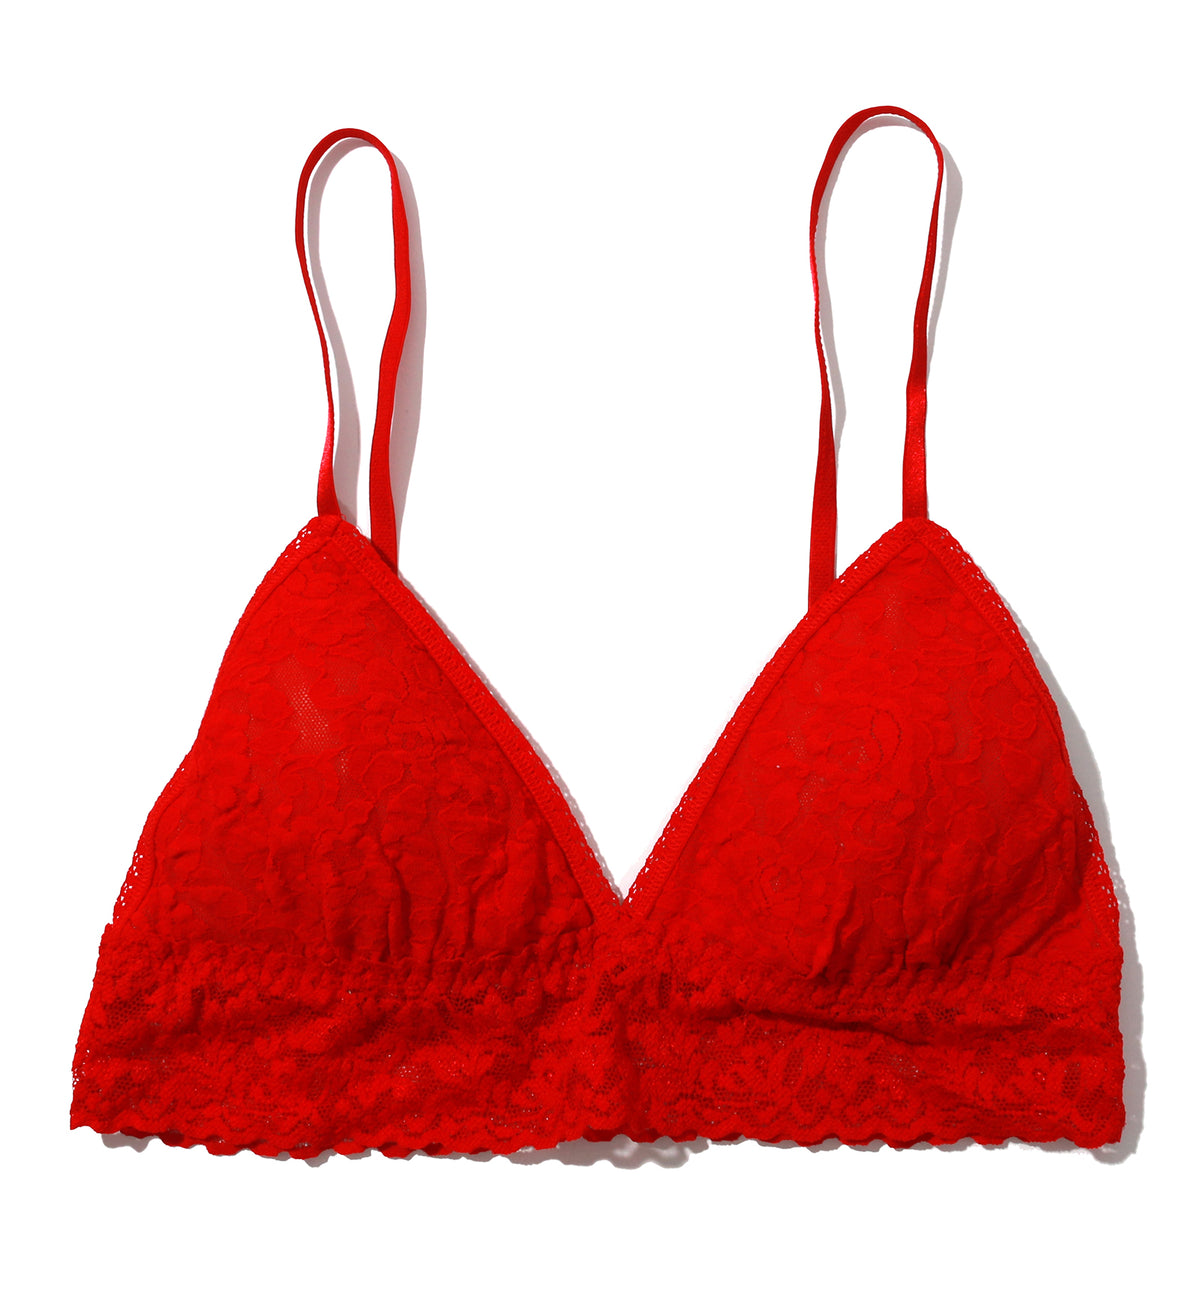 Hanky Panky Signature Lace Padded Triangle Bralette (487004),XS,Red - Red,XS